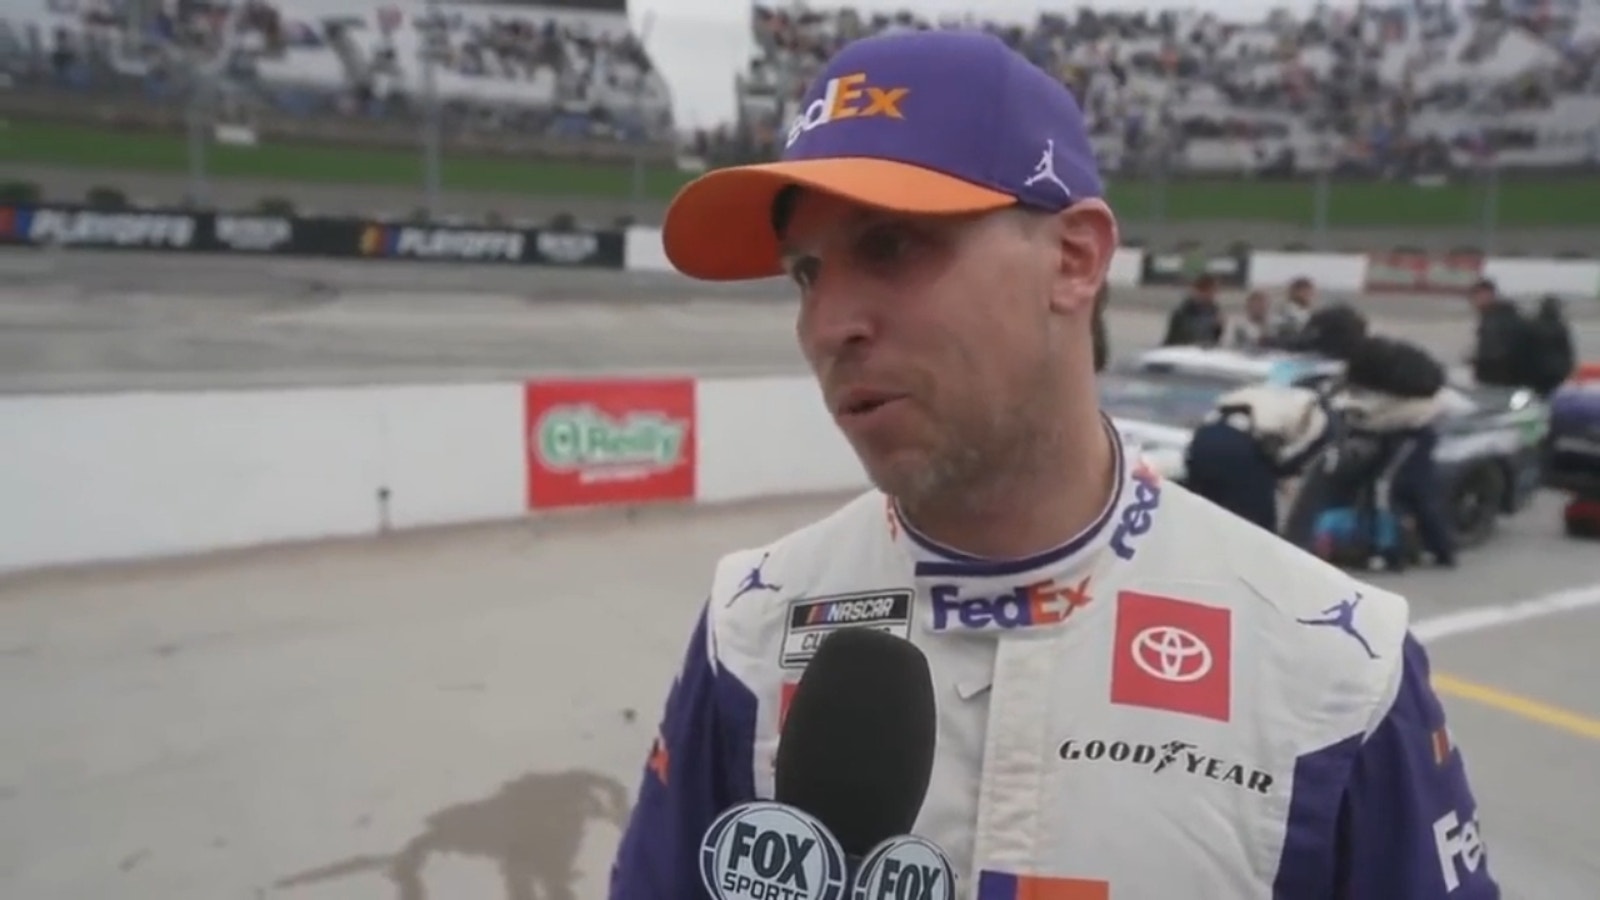 Hamlin on being eliminated after Chastain's wild move